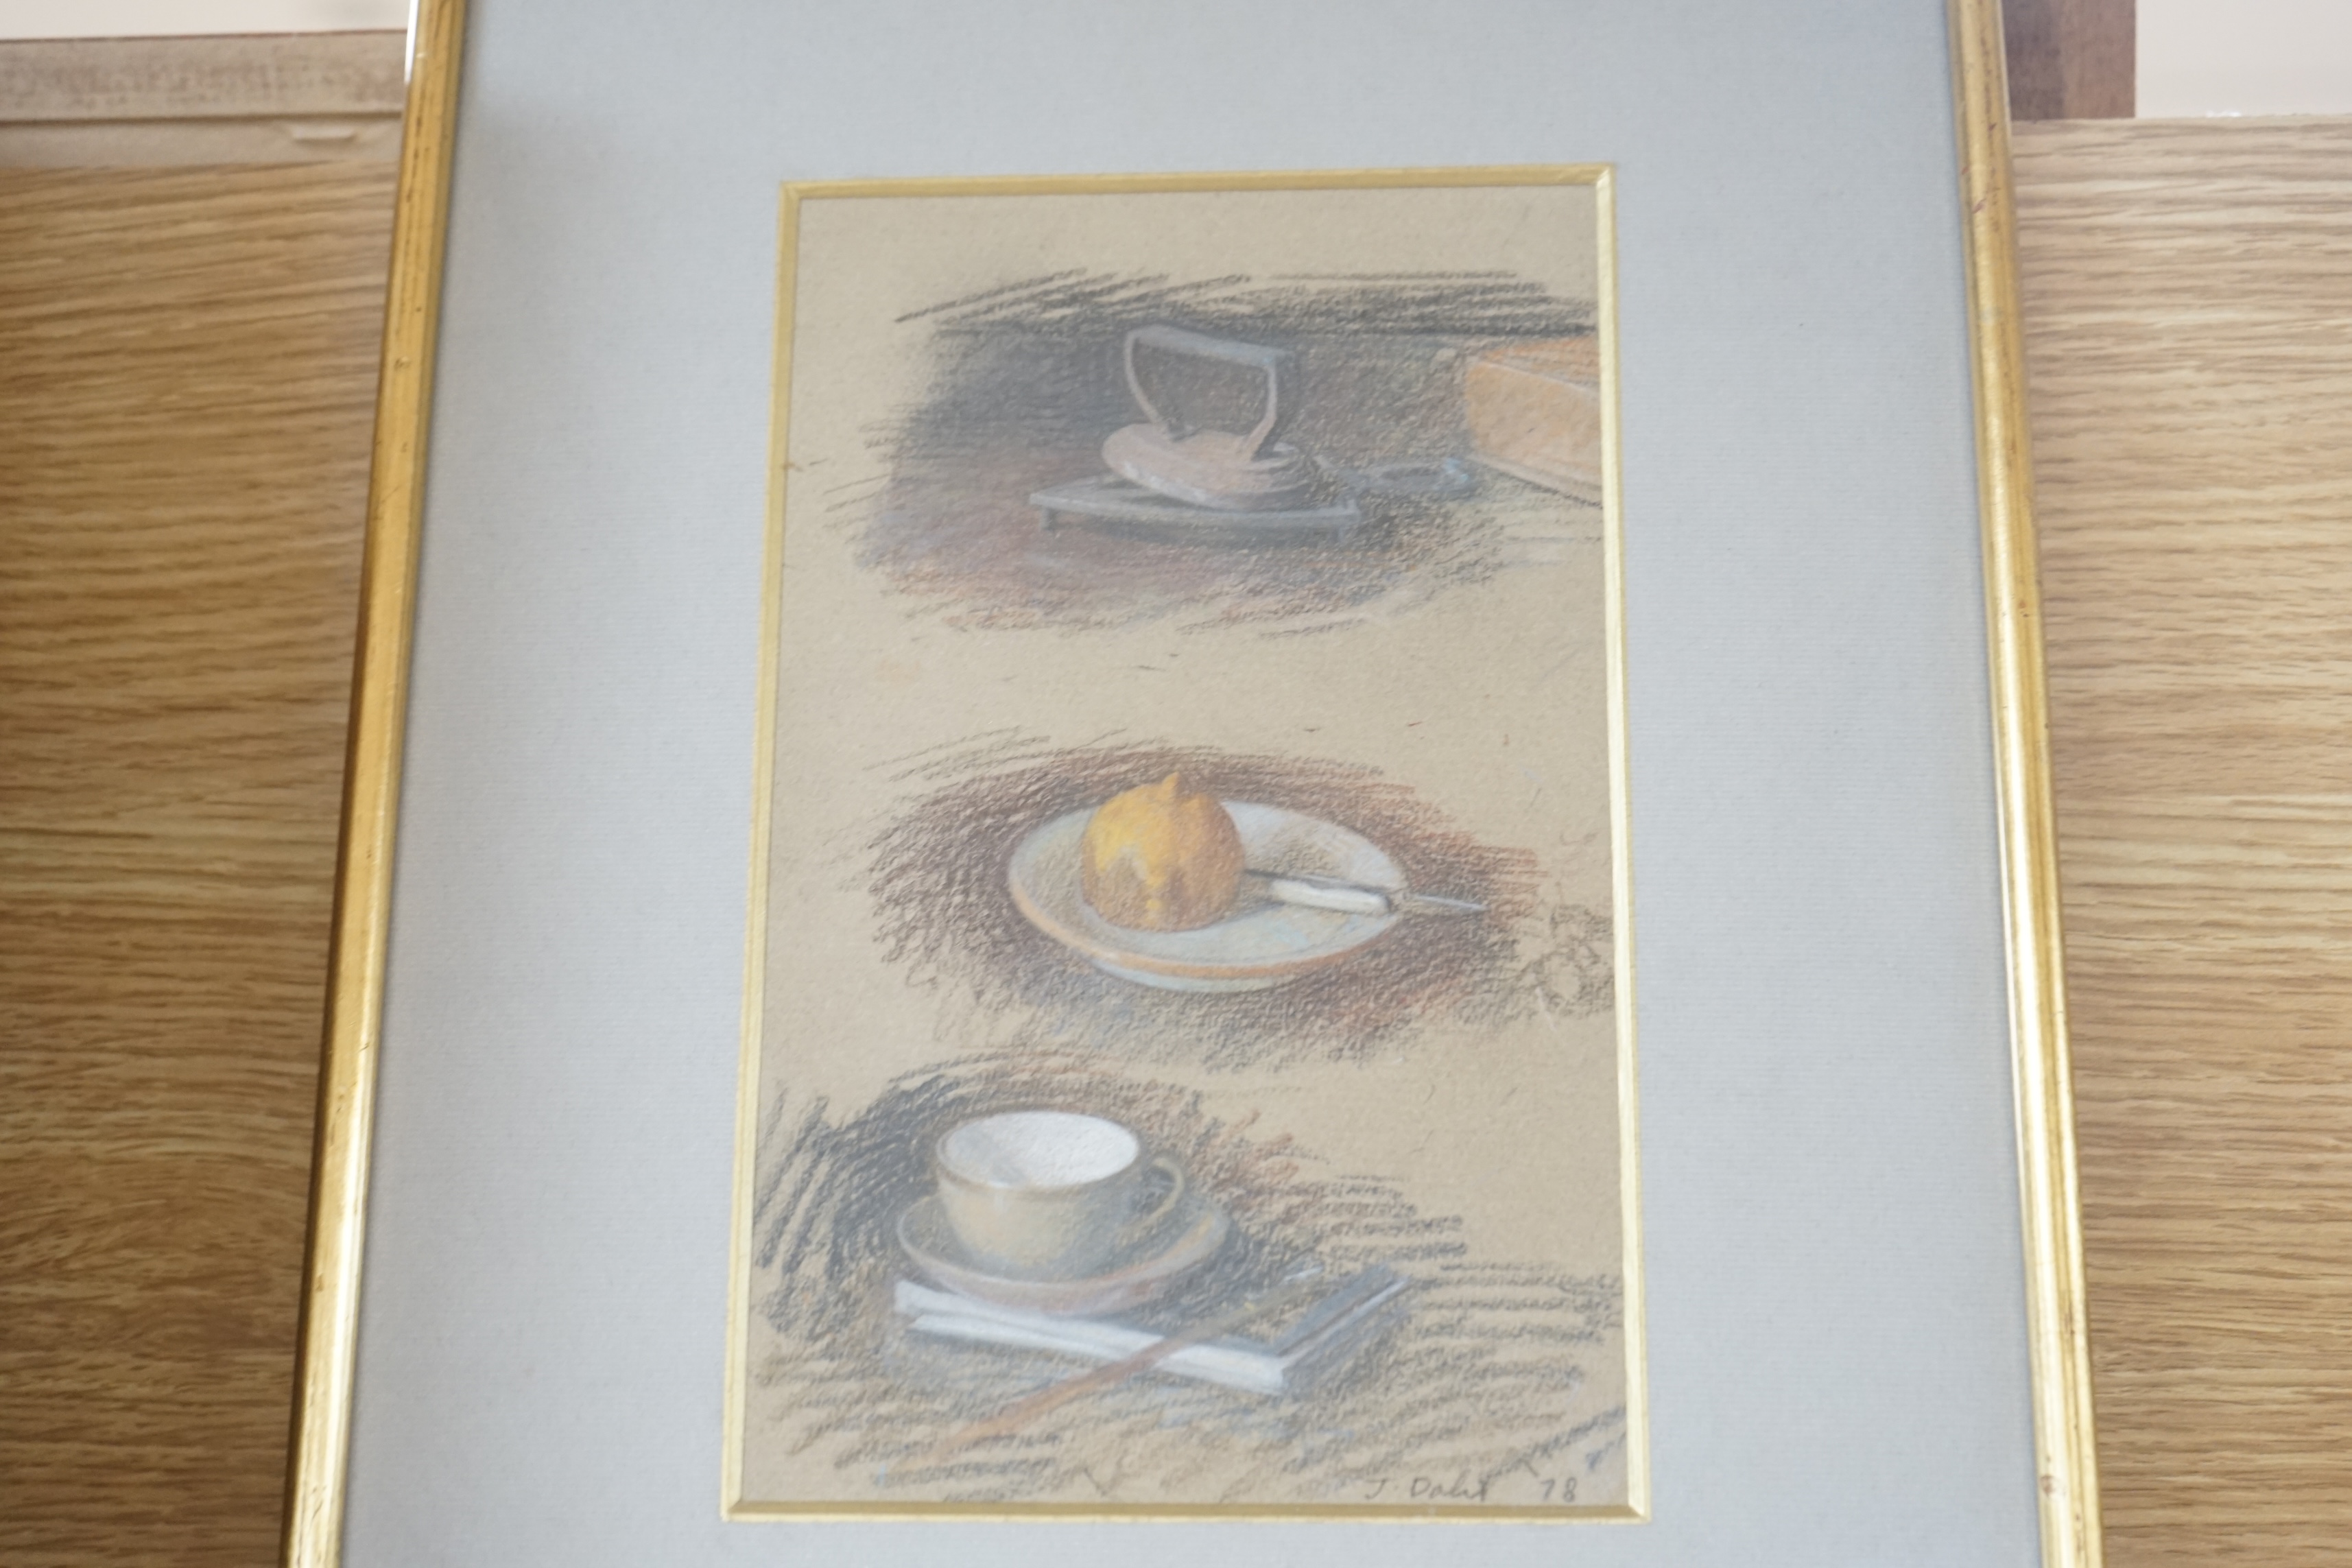 Jehan Daly (1918-2001), two pastel and crayons, Still lifes, each signed and dated ‘78, largest 24 x 15cm. Condition - fair to good